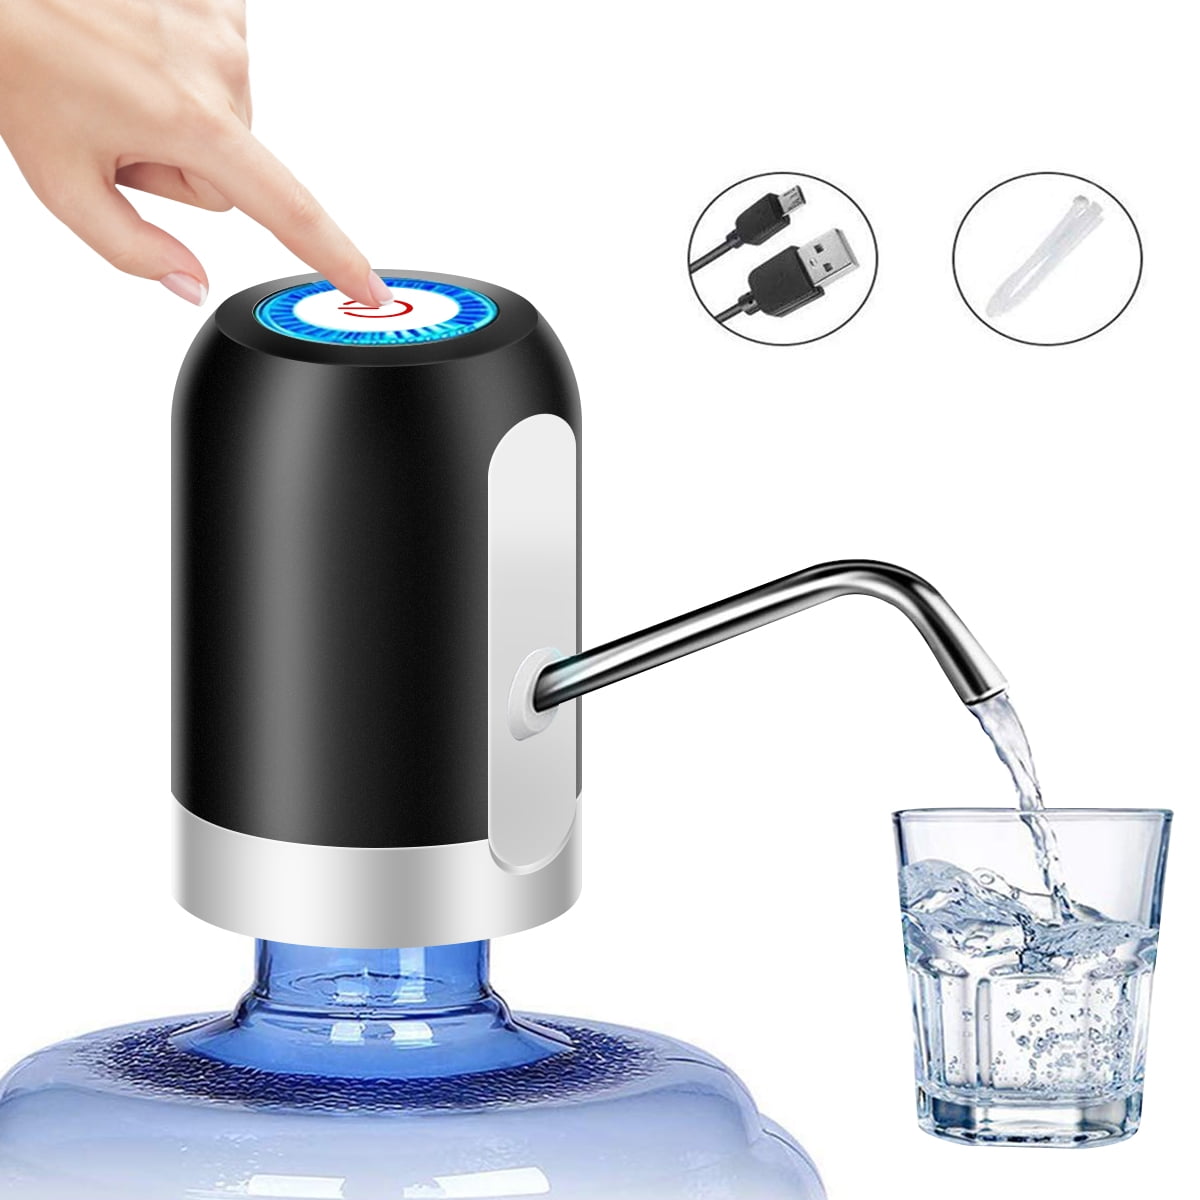 Details about   5 Gallon USB Water Bottle Jug Dispenser Drinking Electric Switch Pump  Universal